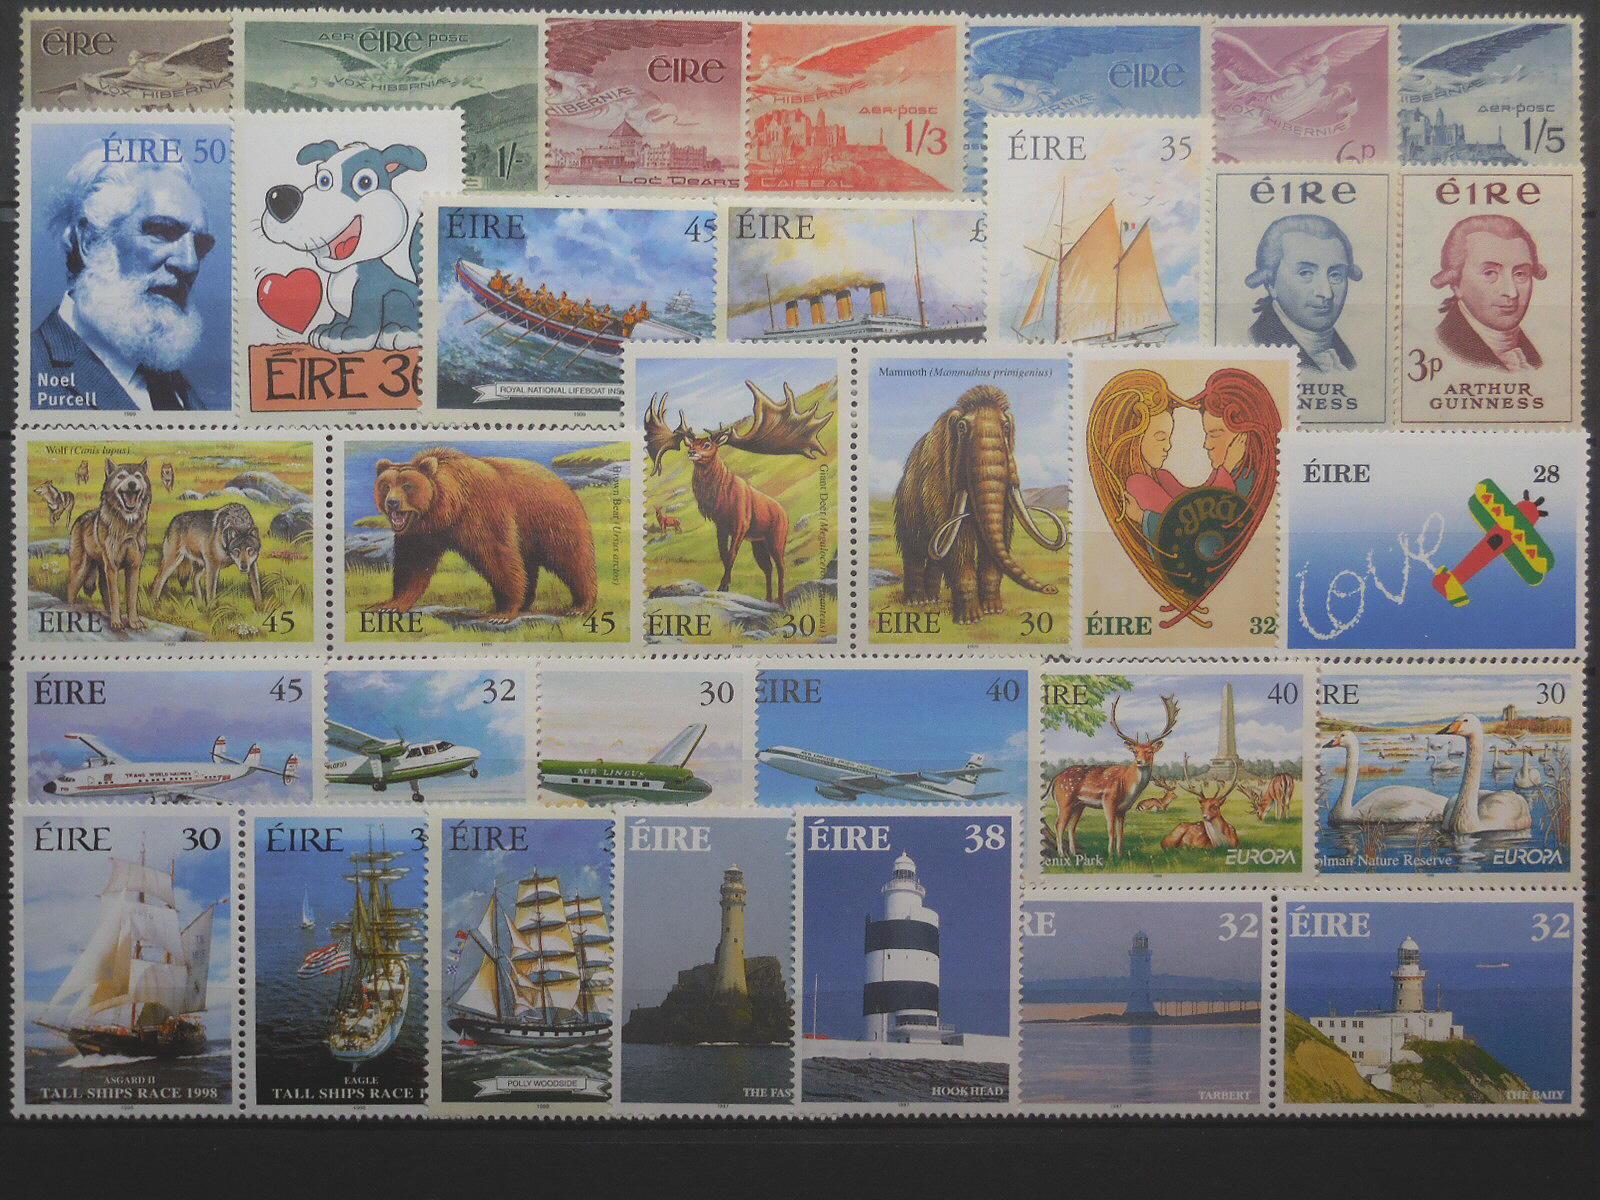 Irish stamps for collectors on approval